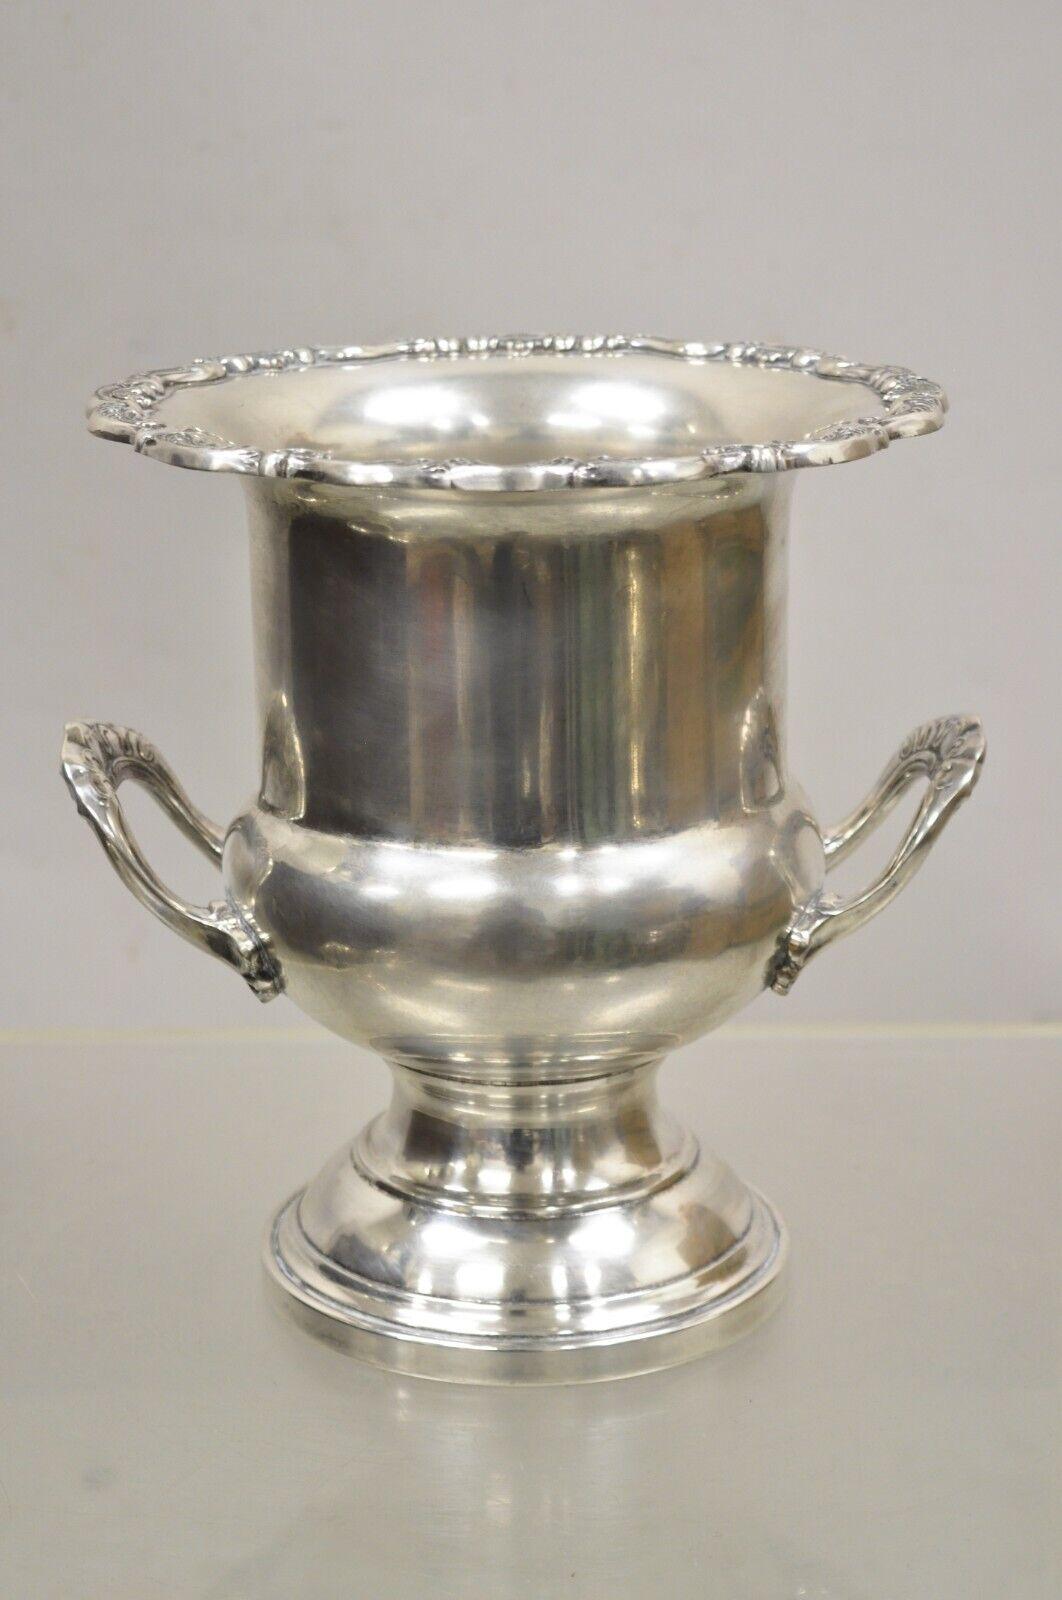 Gorham Heritage YH343 Silver Plated Trophy Cup Champagne Chiller Ice Bucket. Circa Mid to late 20th Century. Measurements:  10